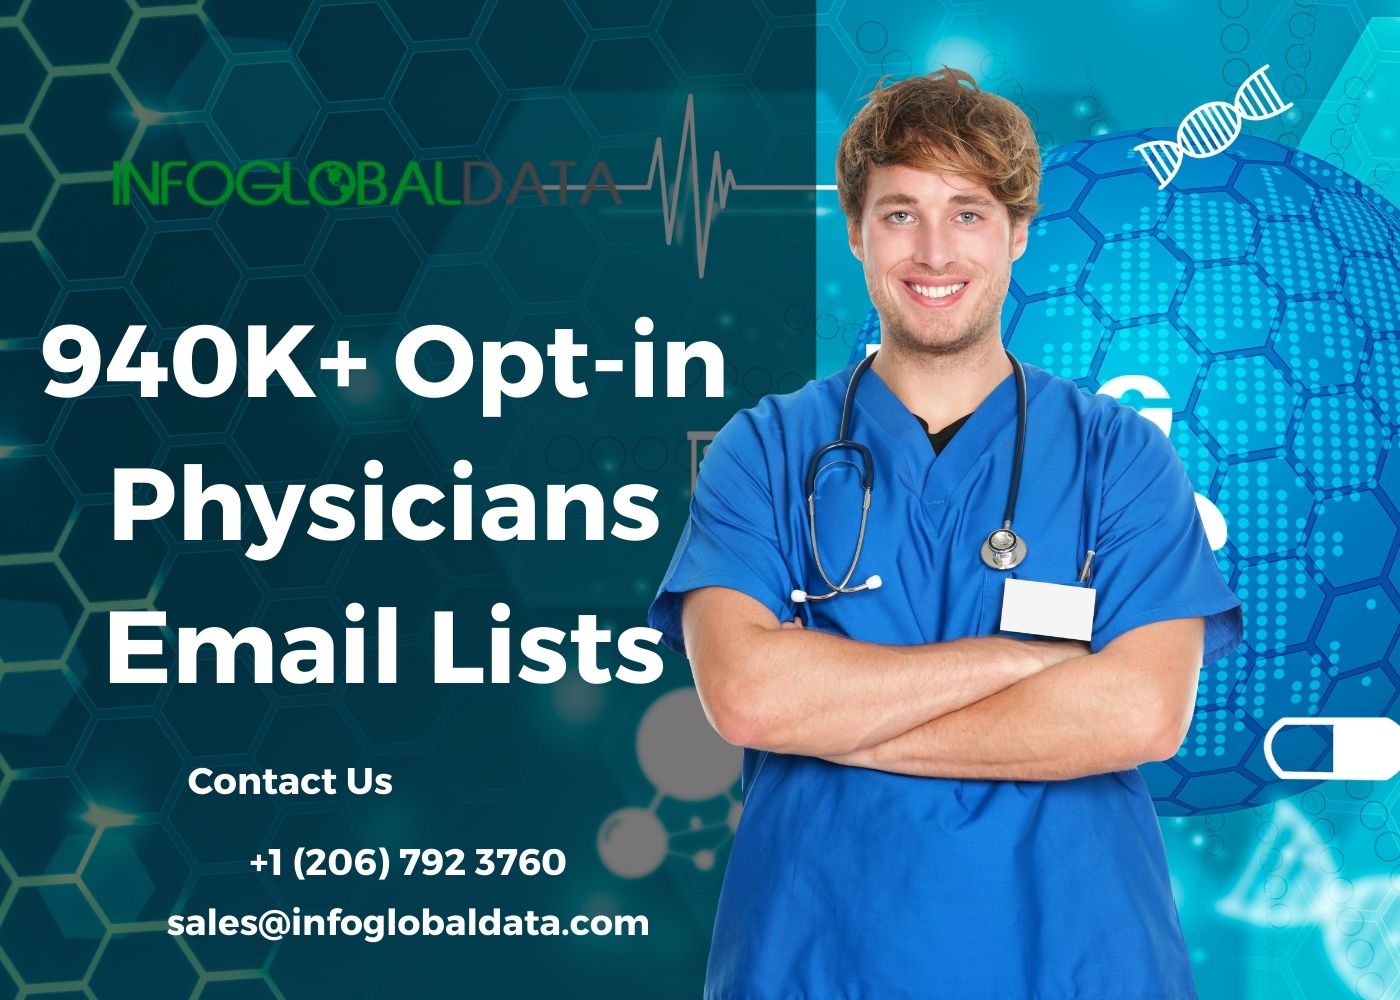 Buy 100% Opt-In Physician Mailing Lists In US